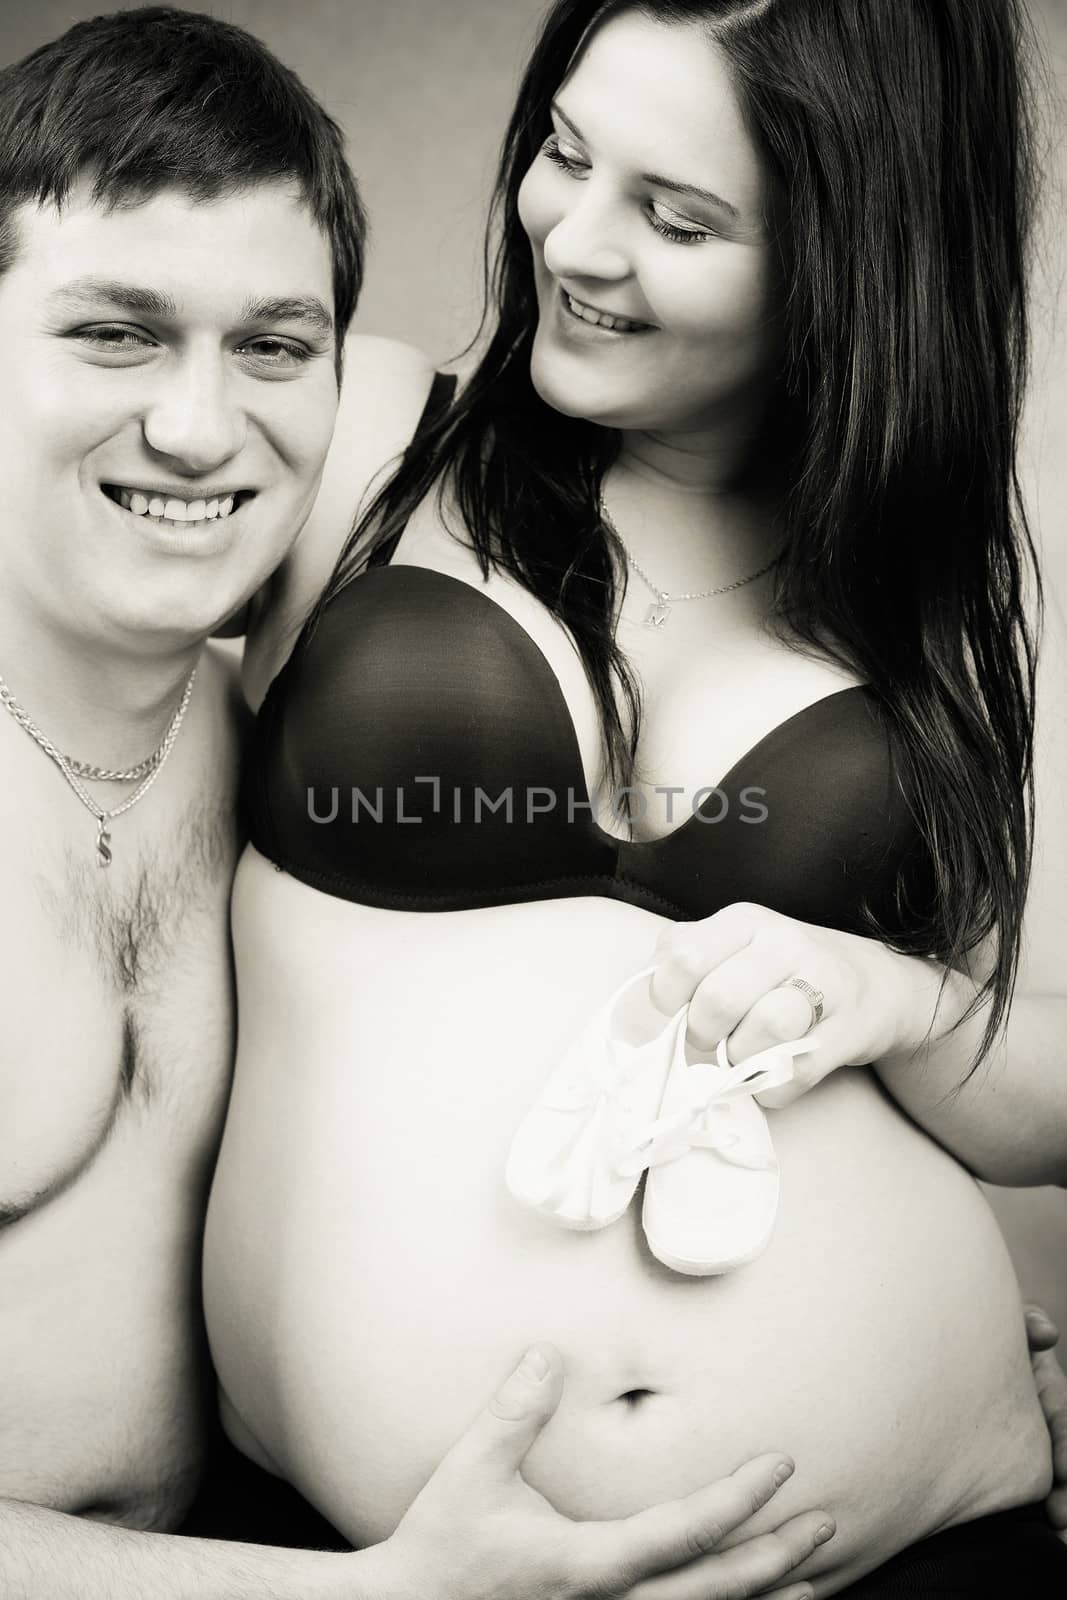 pregnant woman with a child's shoe, her husband tenderly holding her tummy, black and white